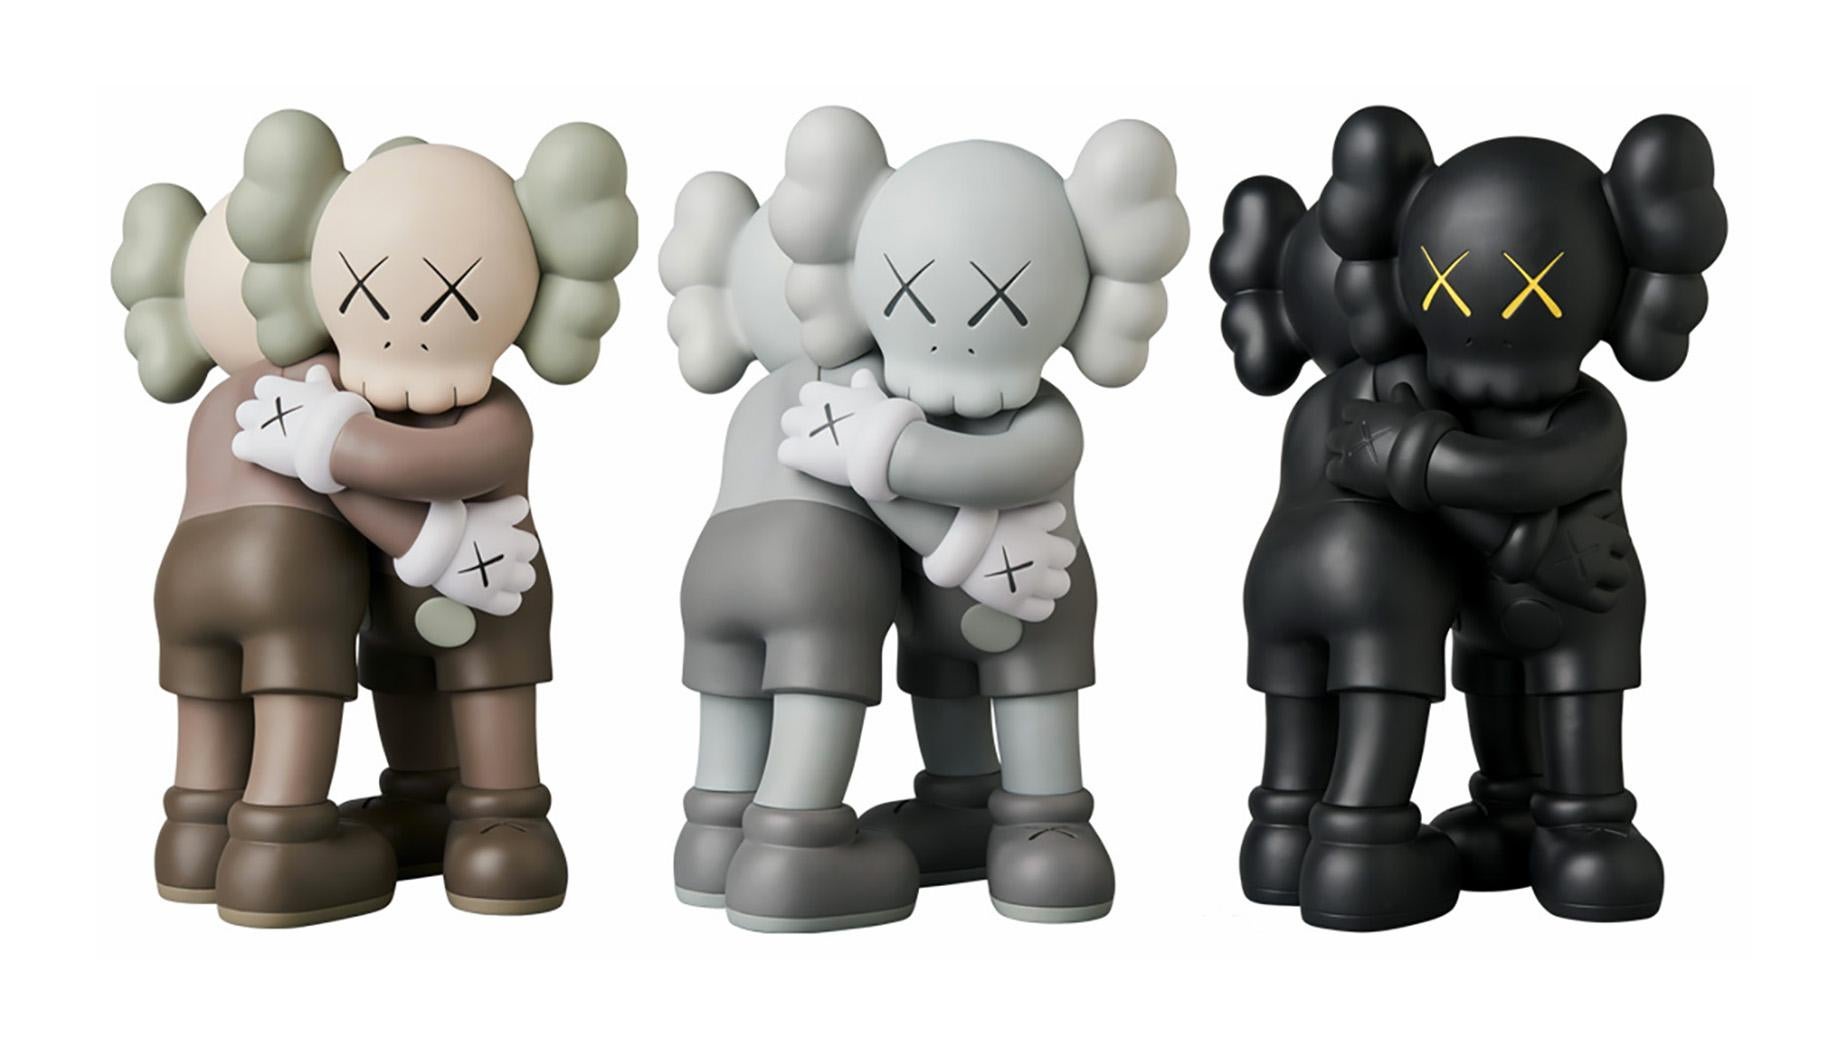 KAWS Together: Complete Set of 3 (Black, Brown and Grey). New and unopened in their original packaging. 

Medium: Vinyl & Cast Resin 
Published by KAWS One and Medicom 2018
10 x 8 x 5 inches (25.4 x 20.3 x 12.7 cm): dimensions apply to each